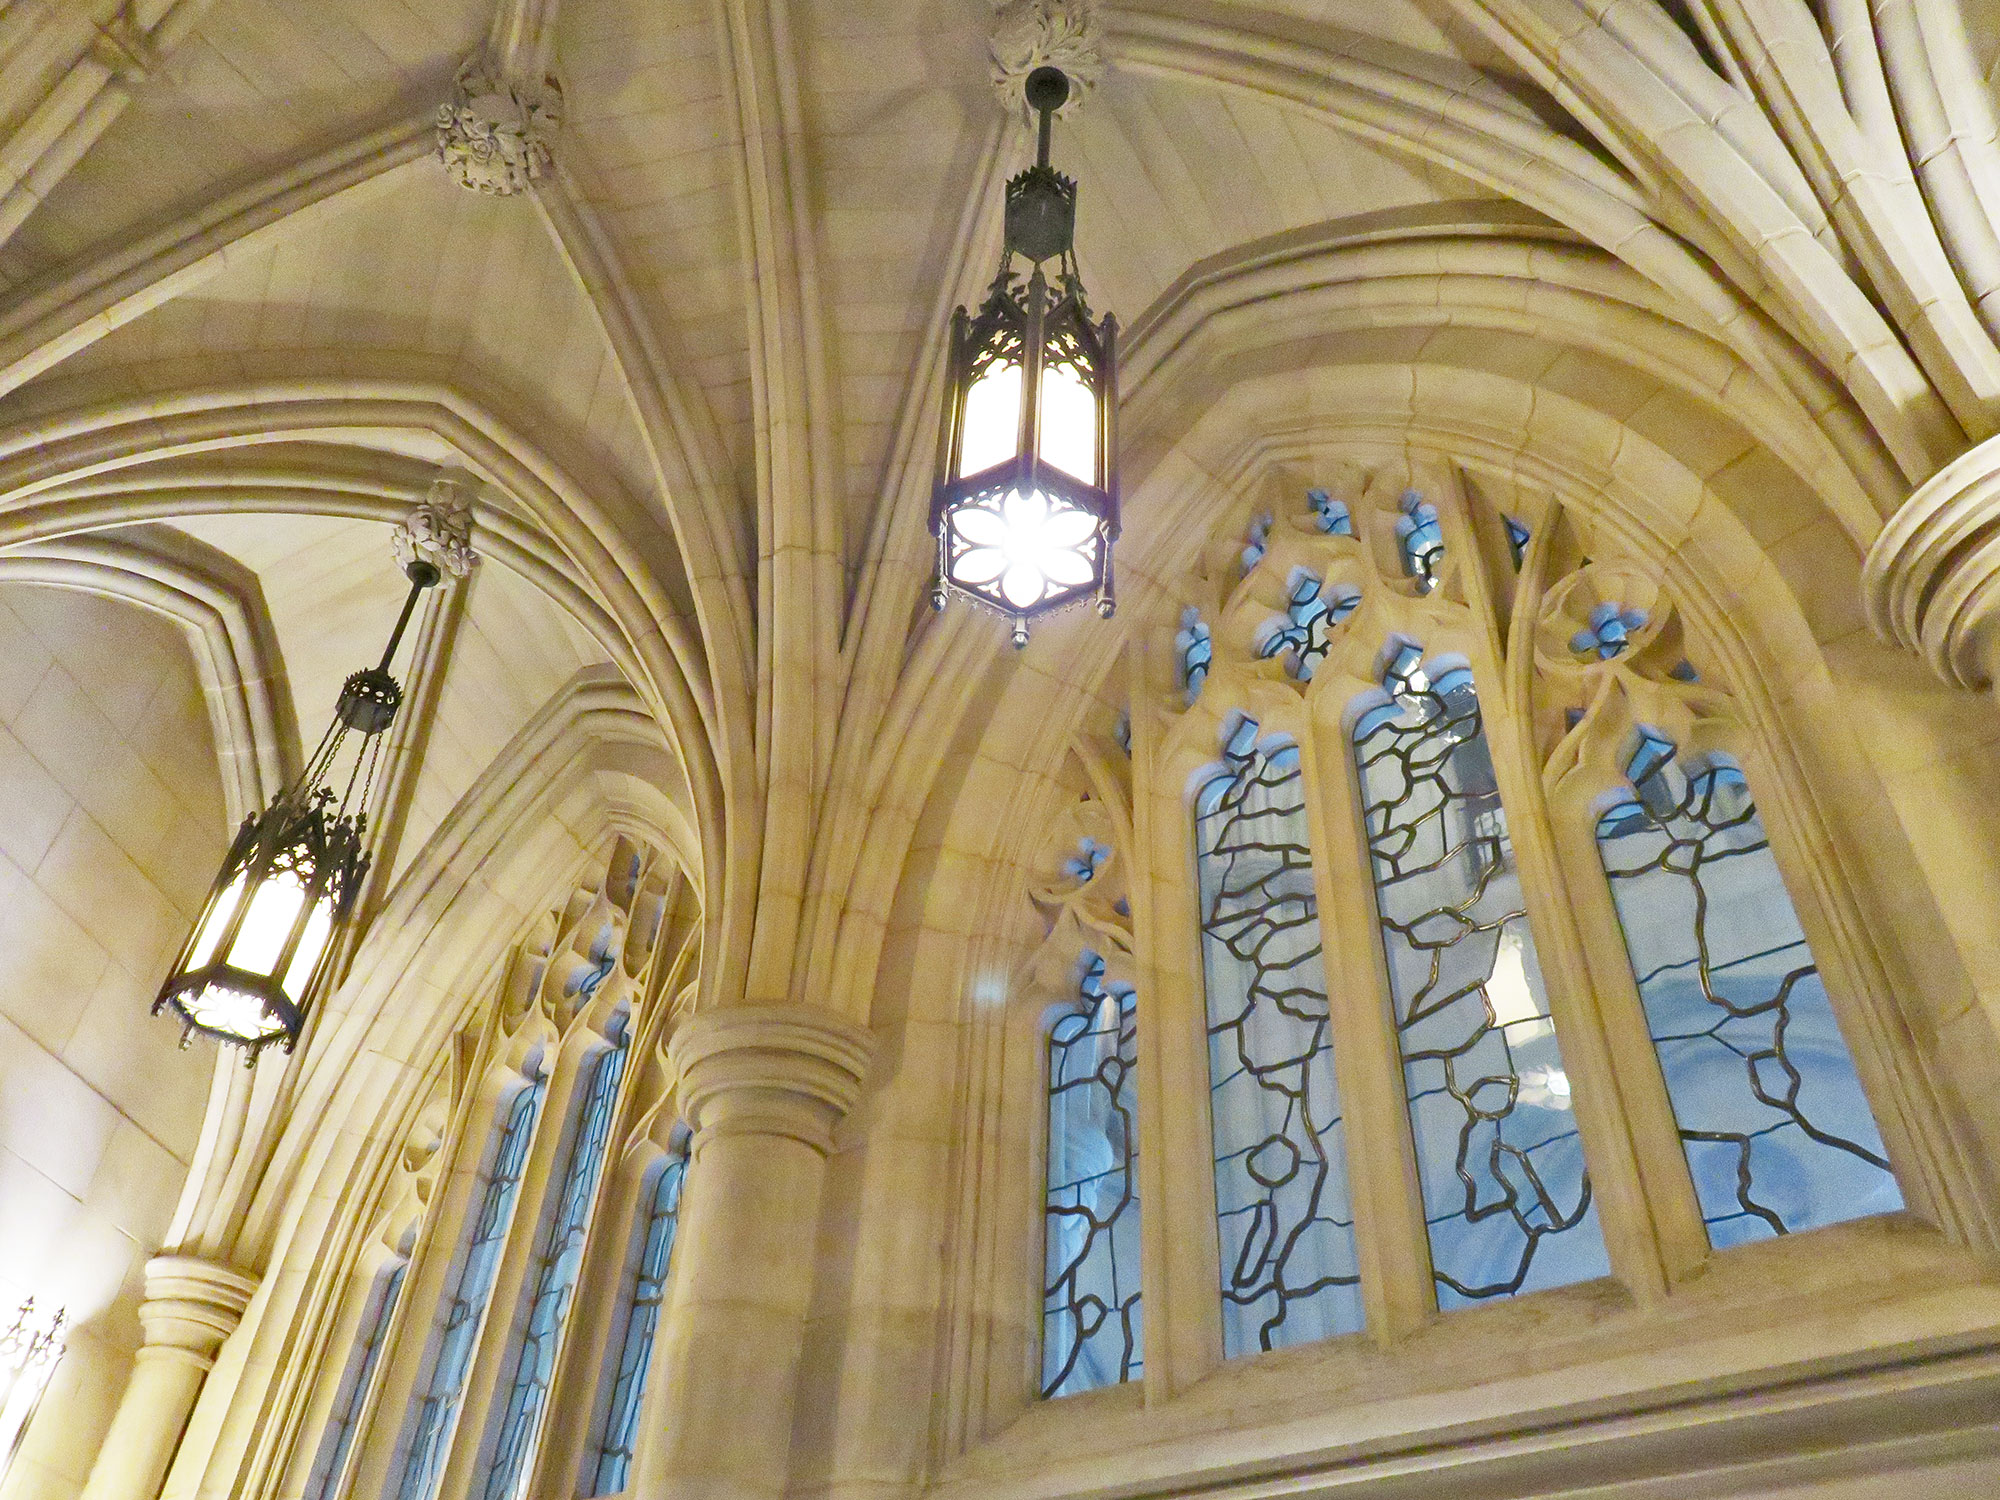 Lamps and the vaulted ceiling at the Washington National Cathedral.